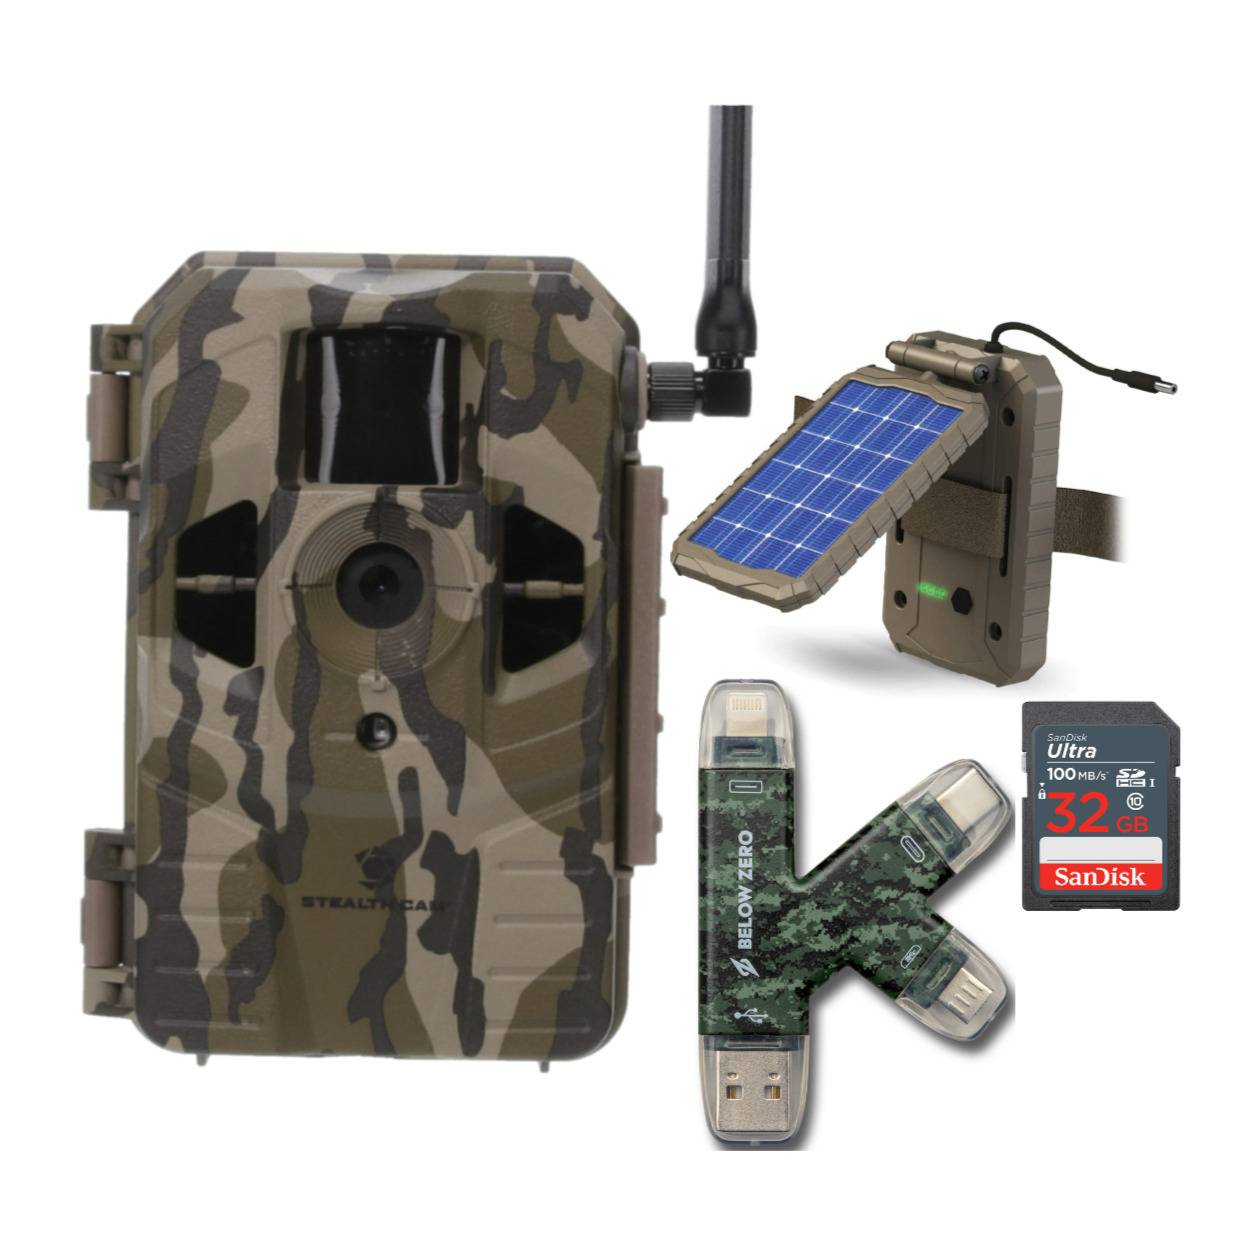 Stealth Cam Connect Cellular Trail Camera (AT&T) with Solar Power Panel and 32GB Memory Card Bundle